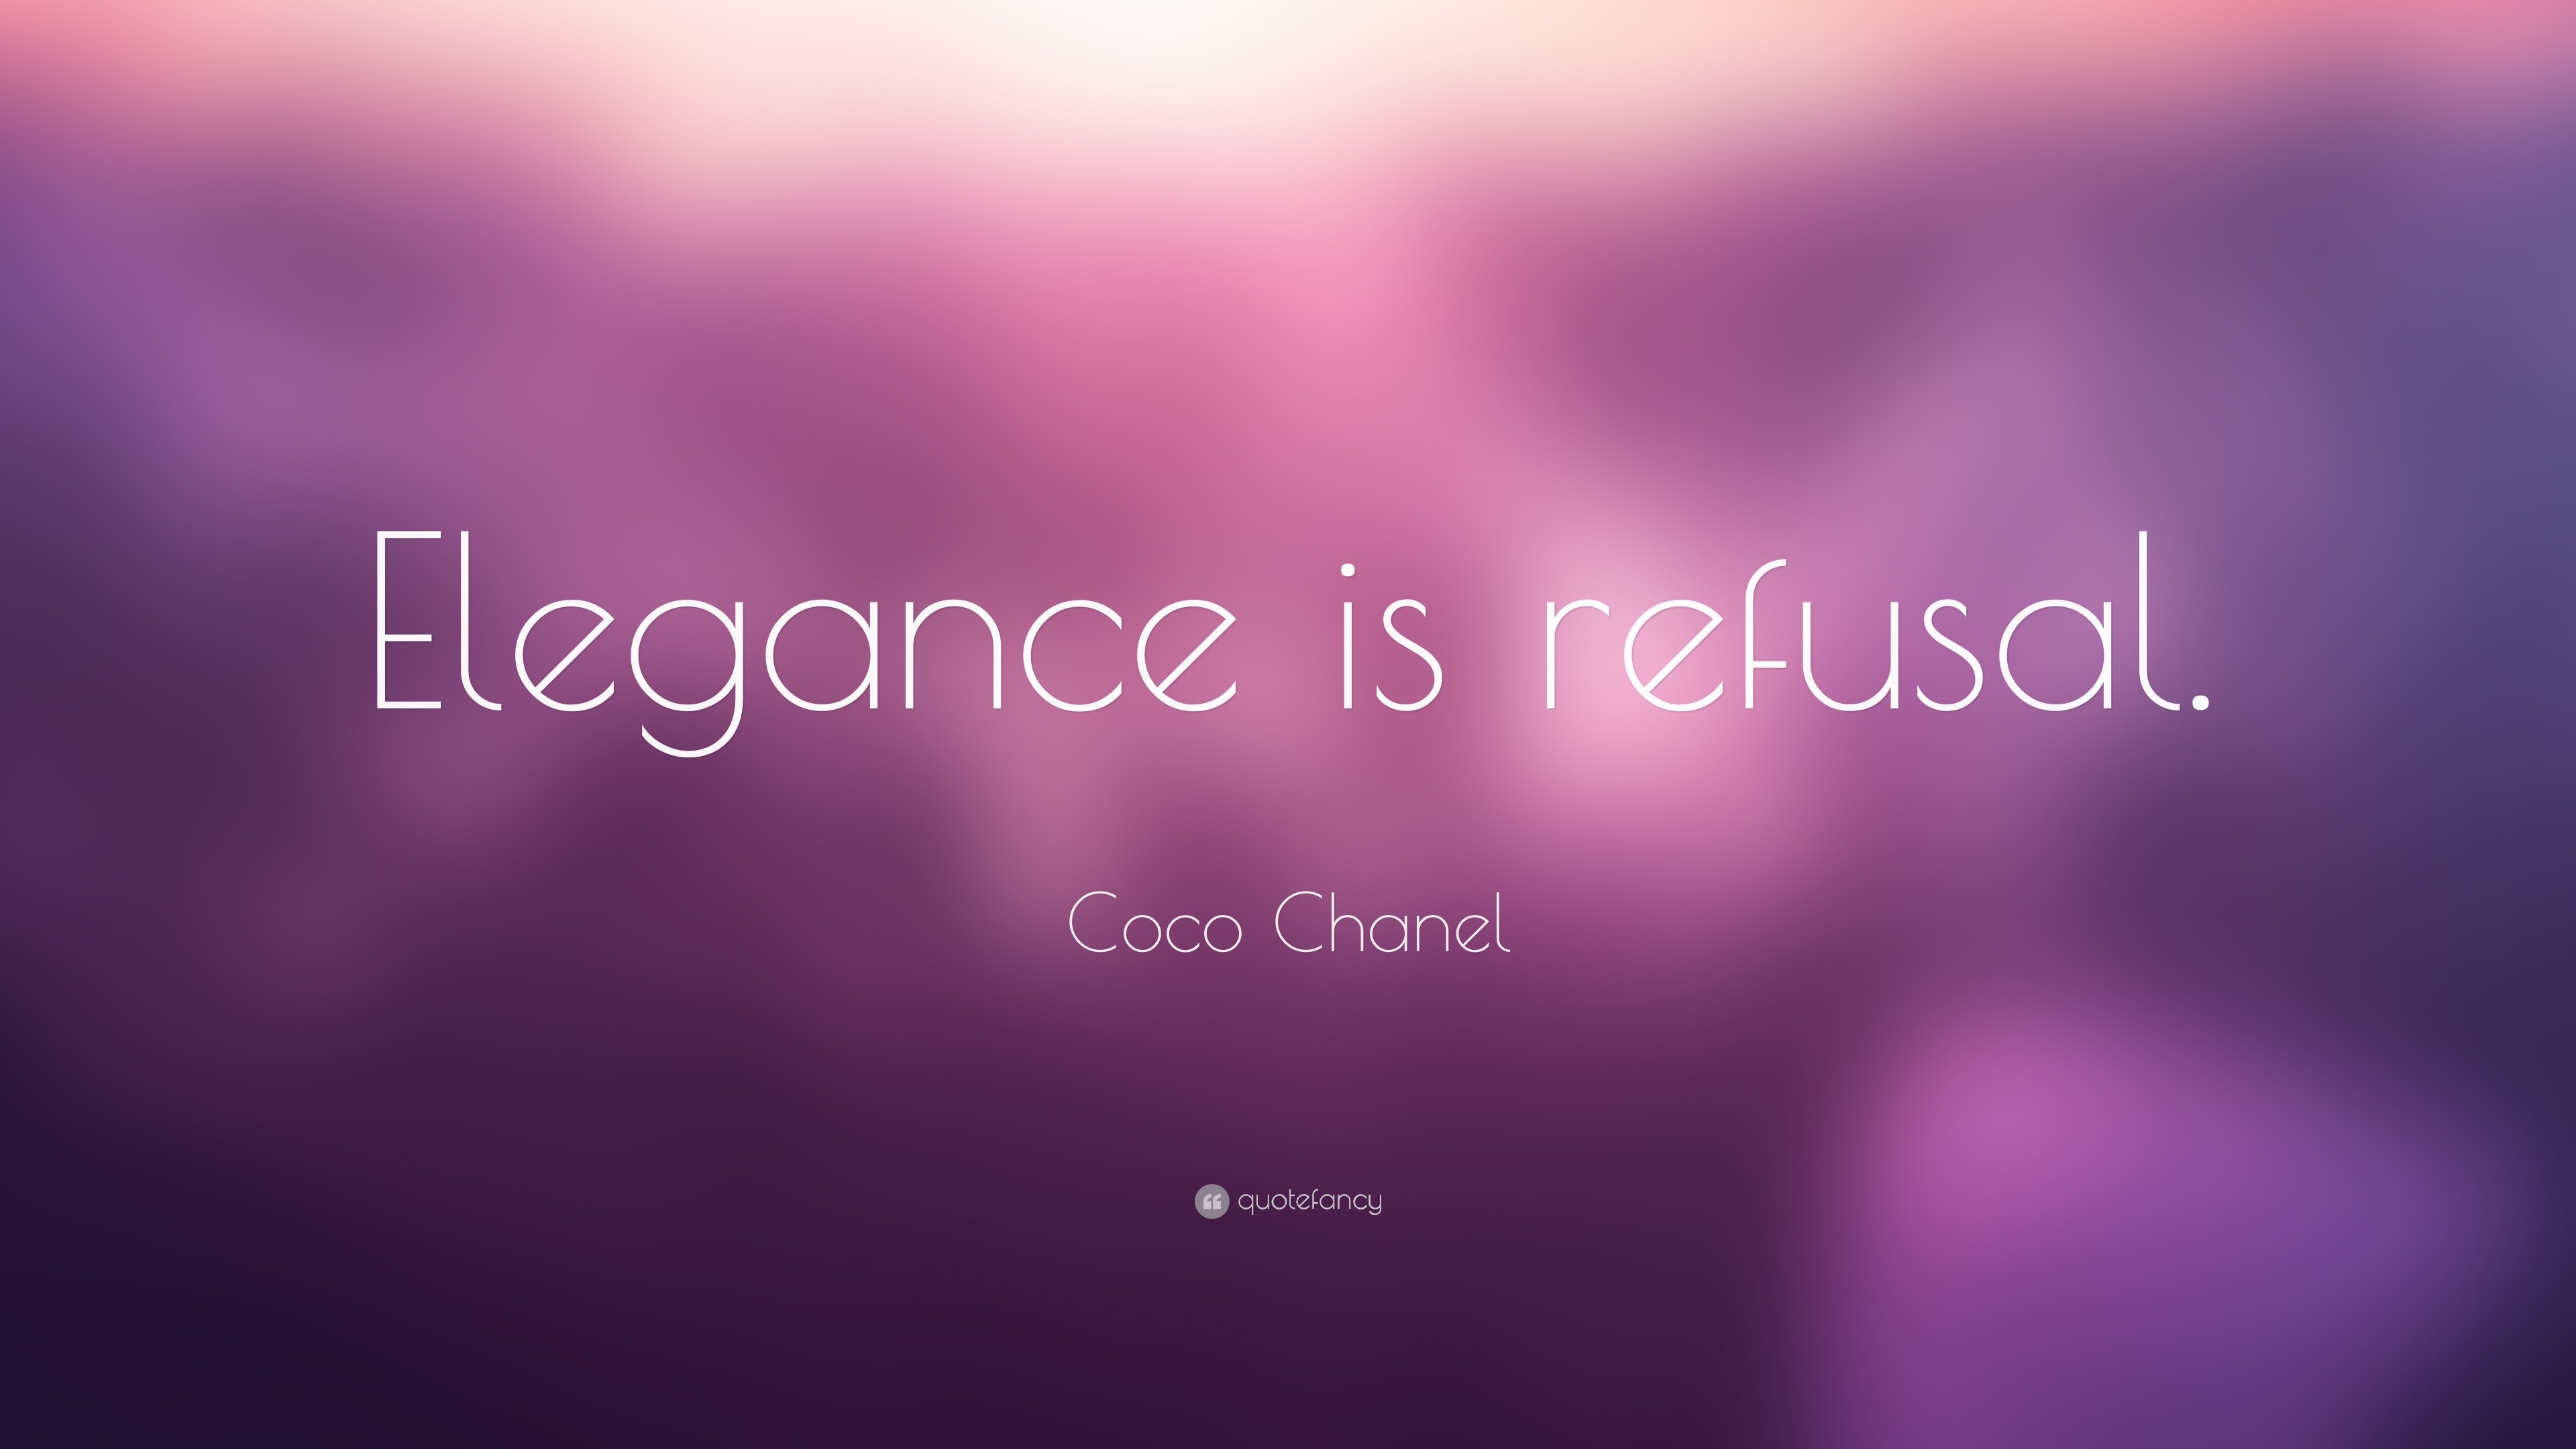 3840x2160 Coco Chanel Quote: “Elegance is refusal.”